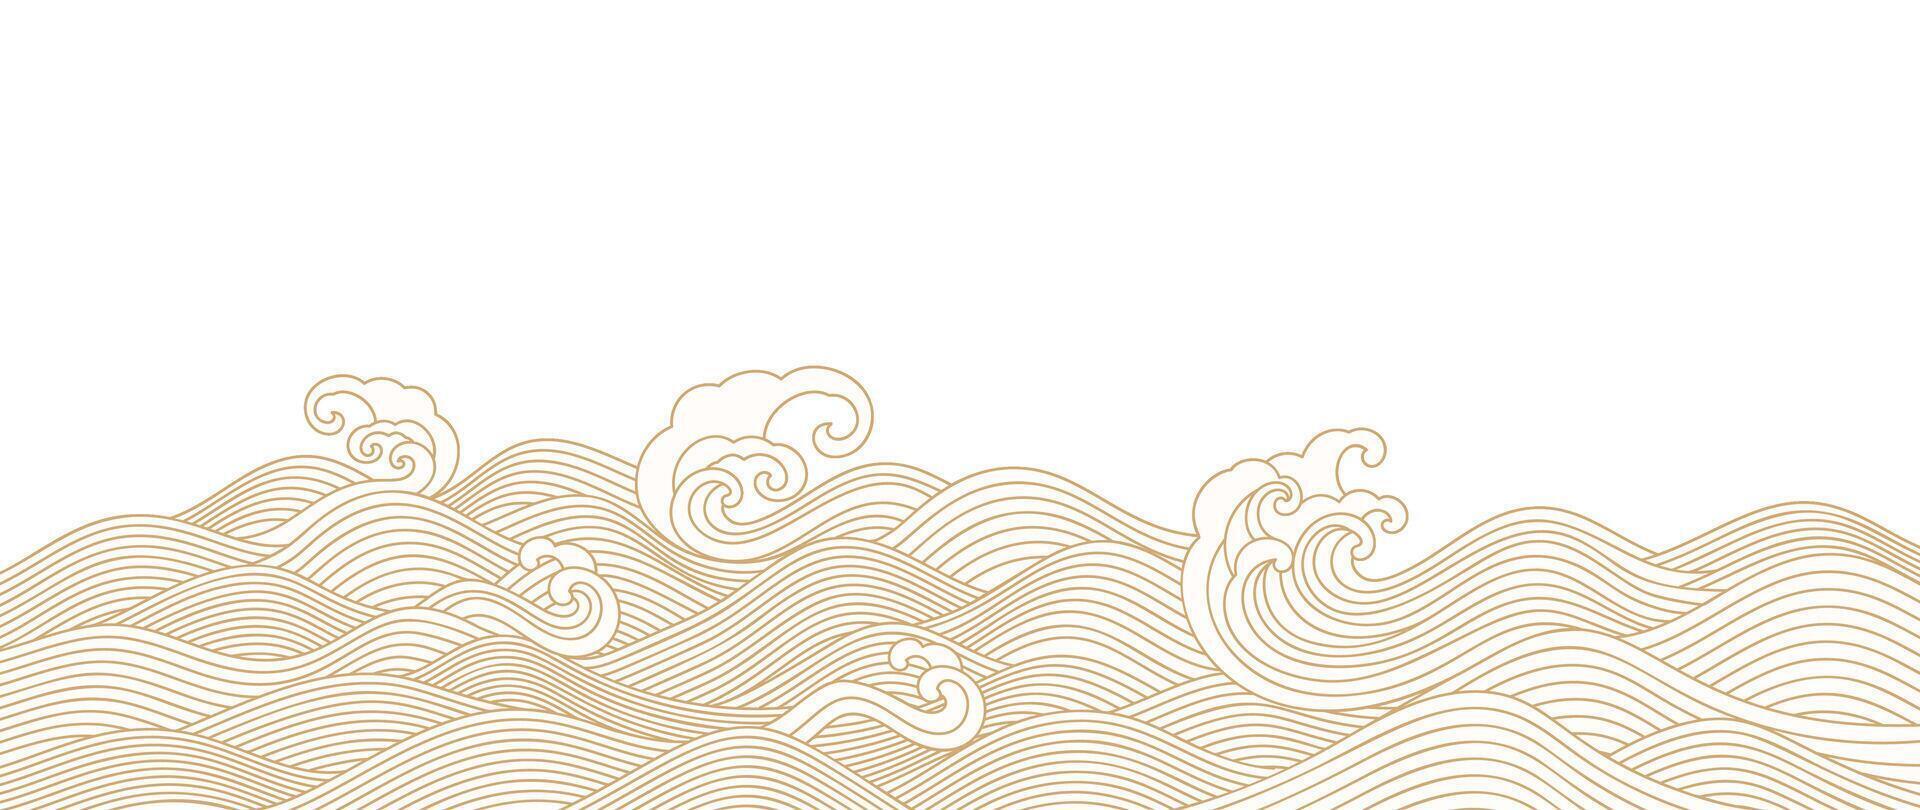 Japanese sea wave background vector. Wallpaper design with gold and white ocean wave pattern backdrop. Modern luxury oriental illustration for cover, banner, website, decor, border. vector